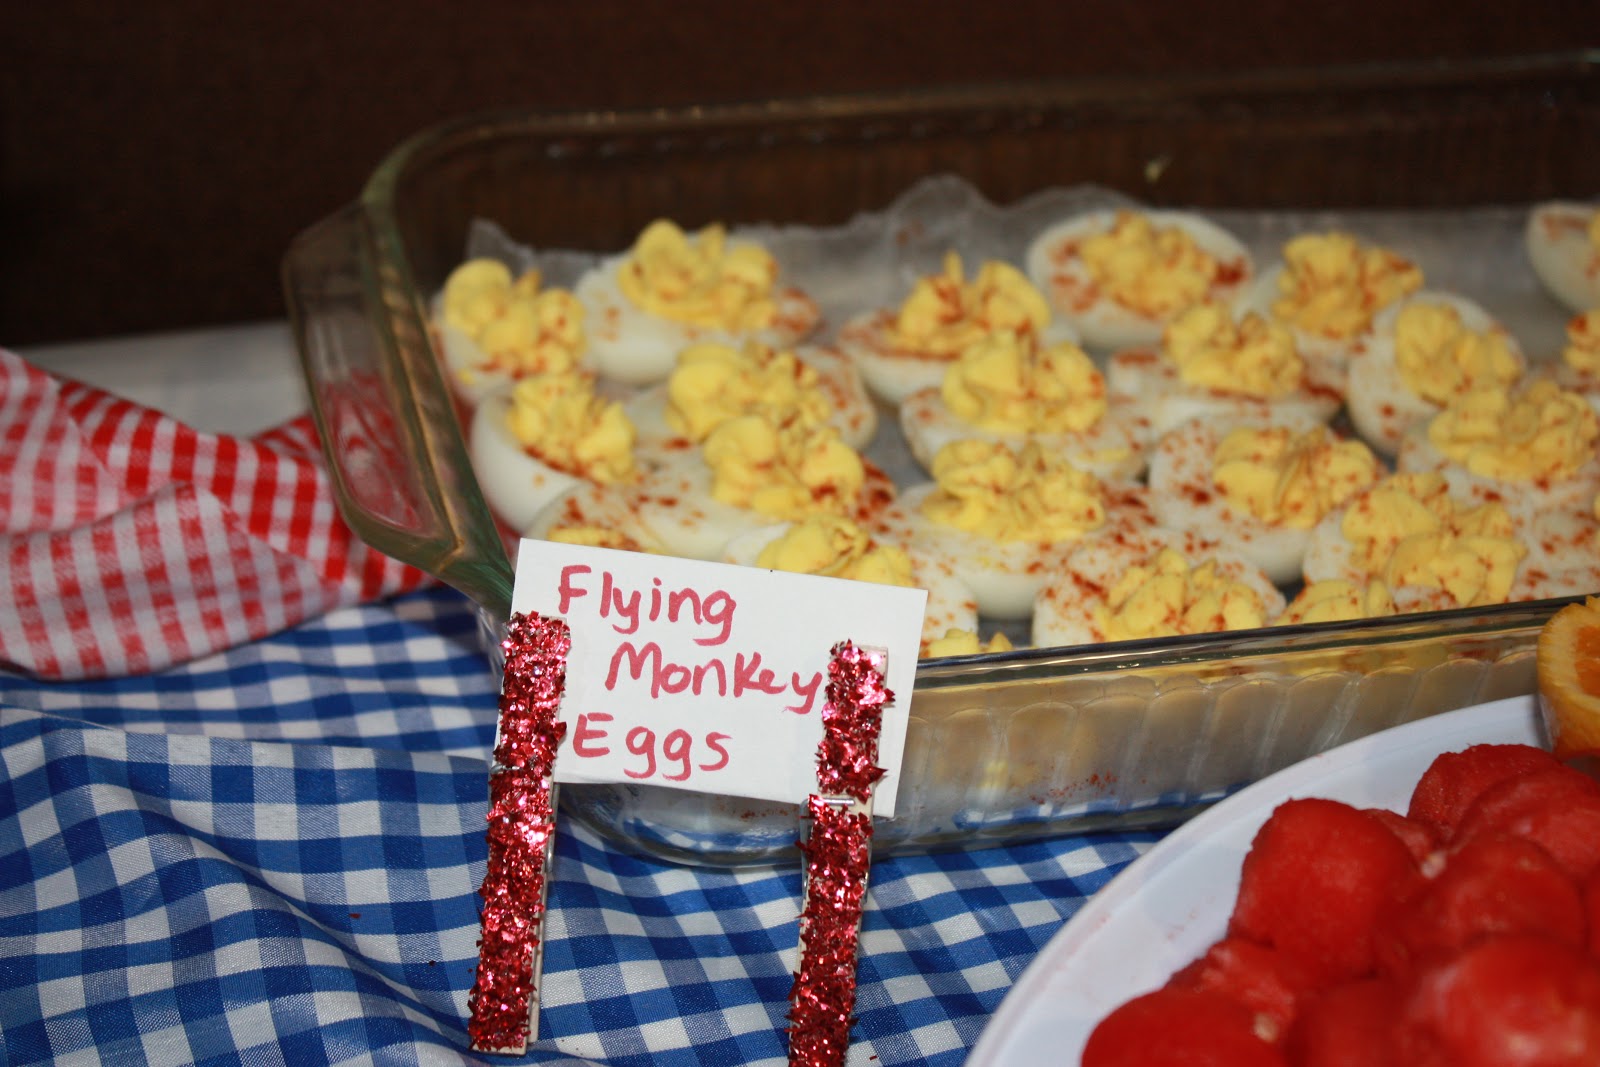 Gets Bored Easily: Wizard of Oz Retirement Party - Food